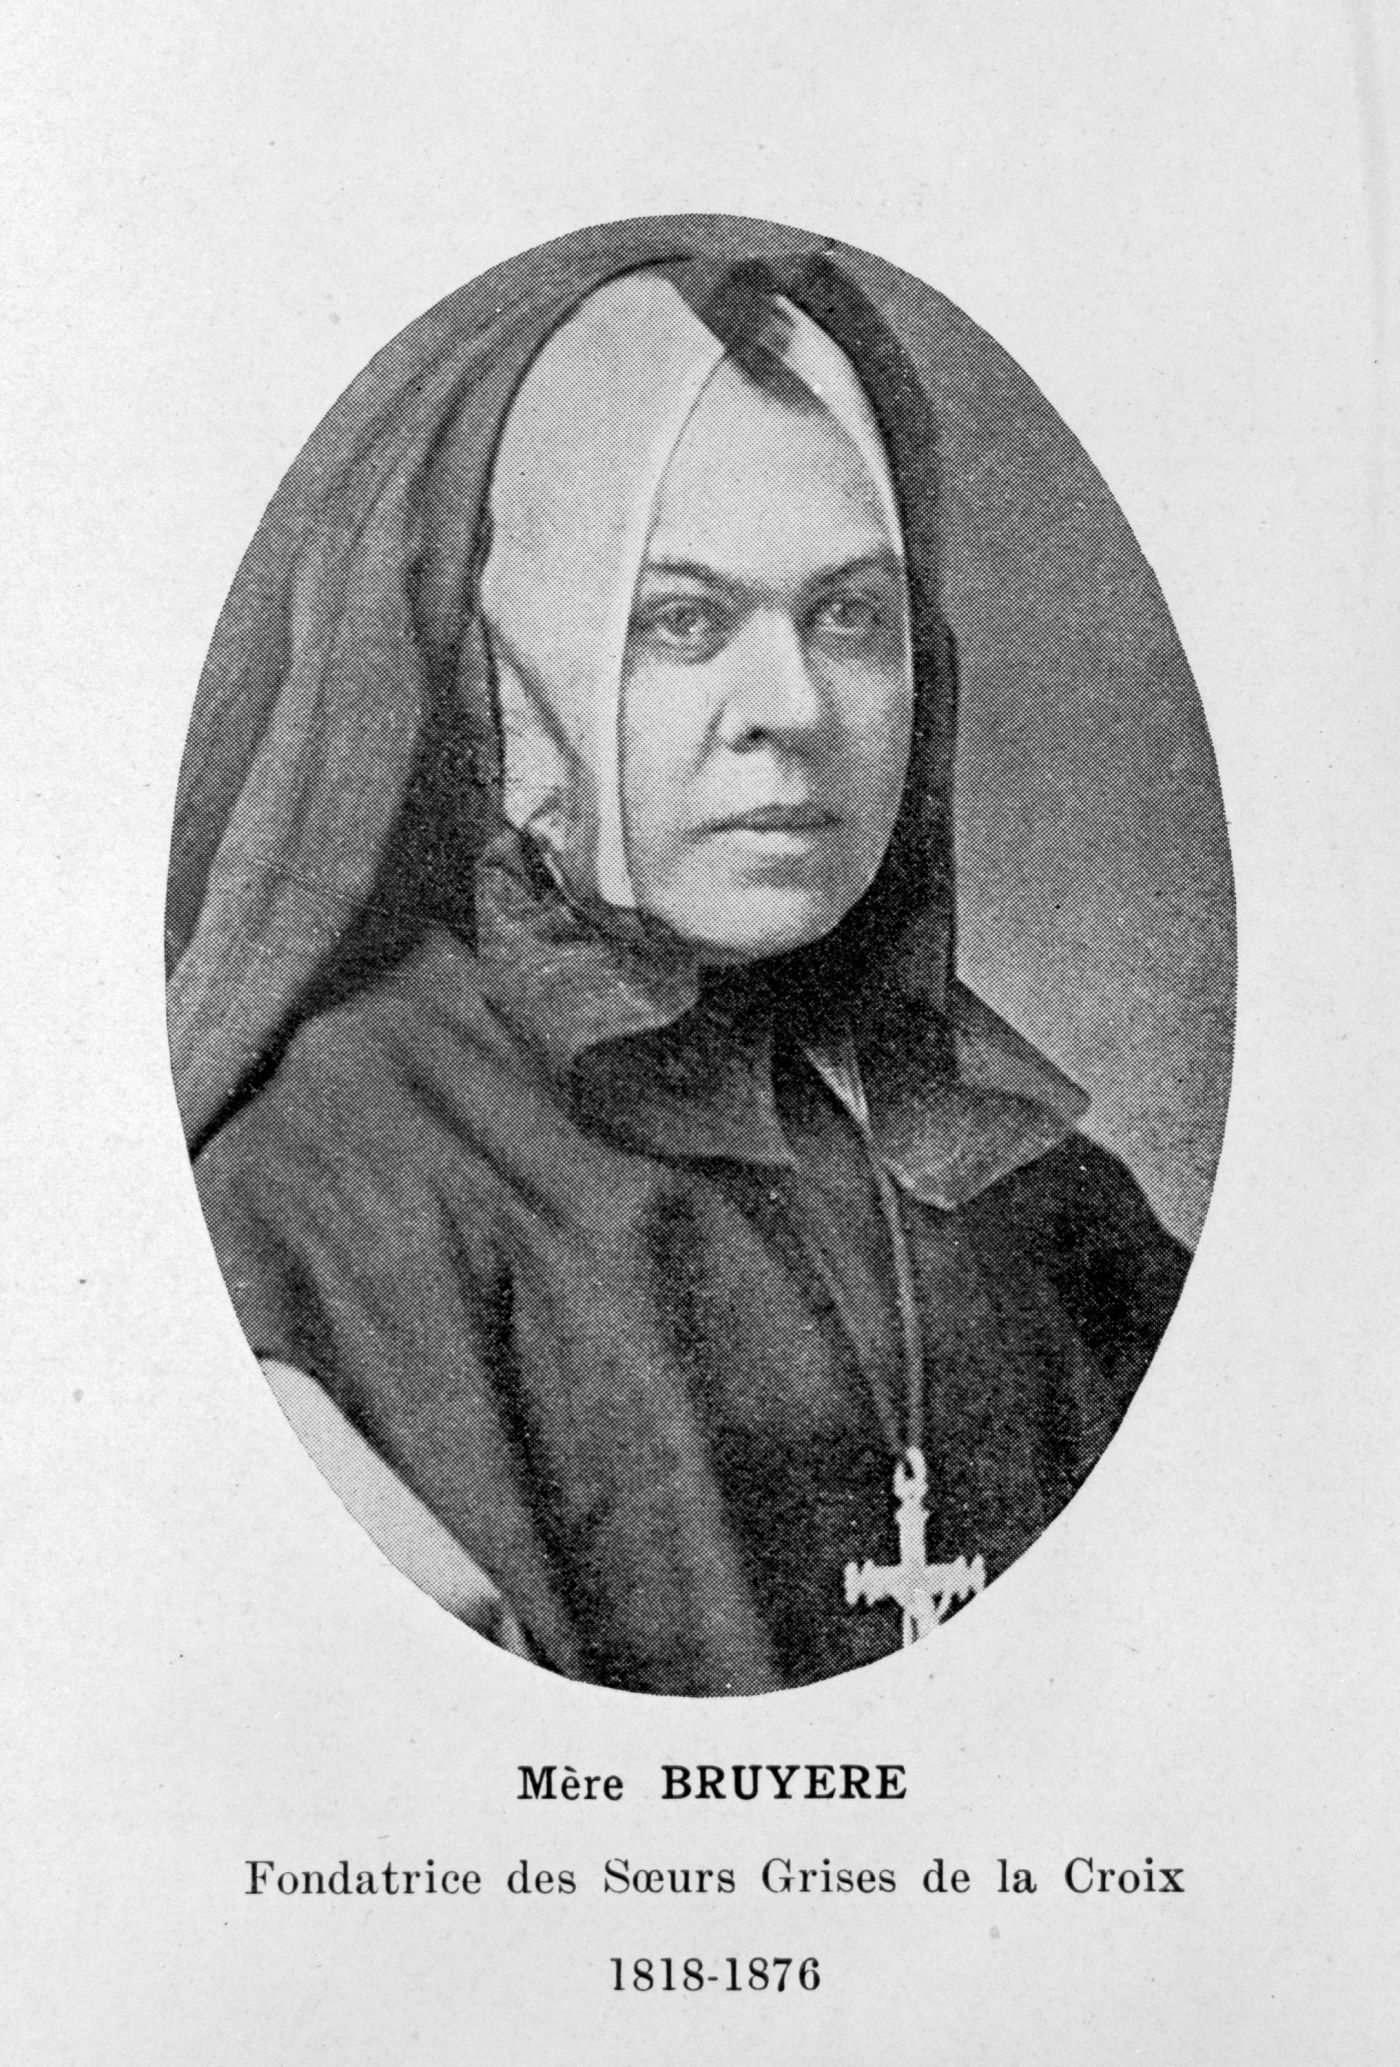 Page from a book, with a black and white photograph of a middle-aged nun. A text typed in French accompanies the photo. The nun is wearing a black coat and veil, as well as a large cross.